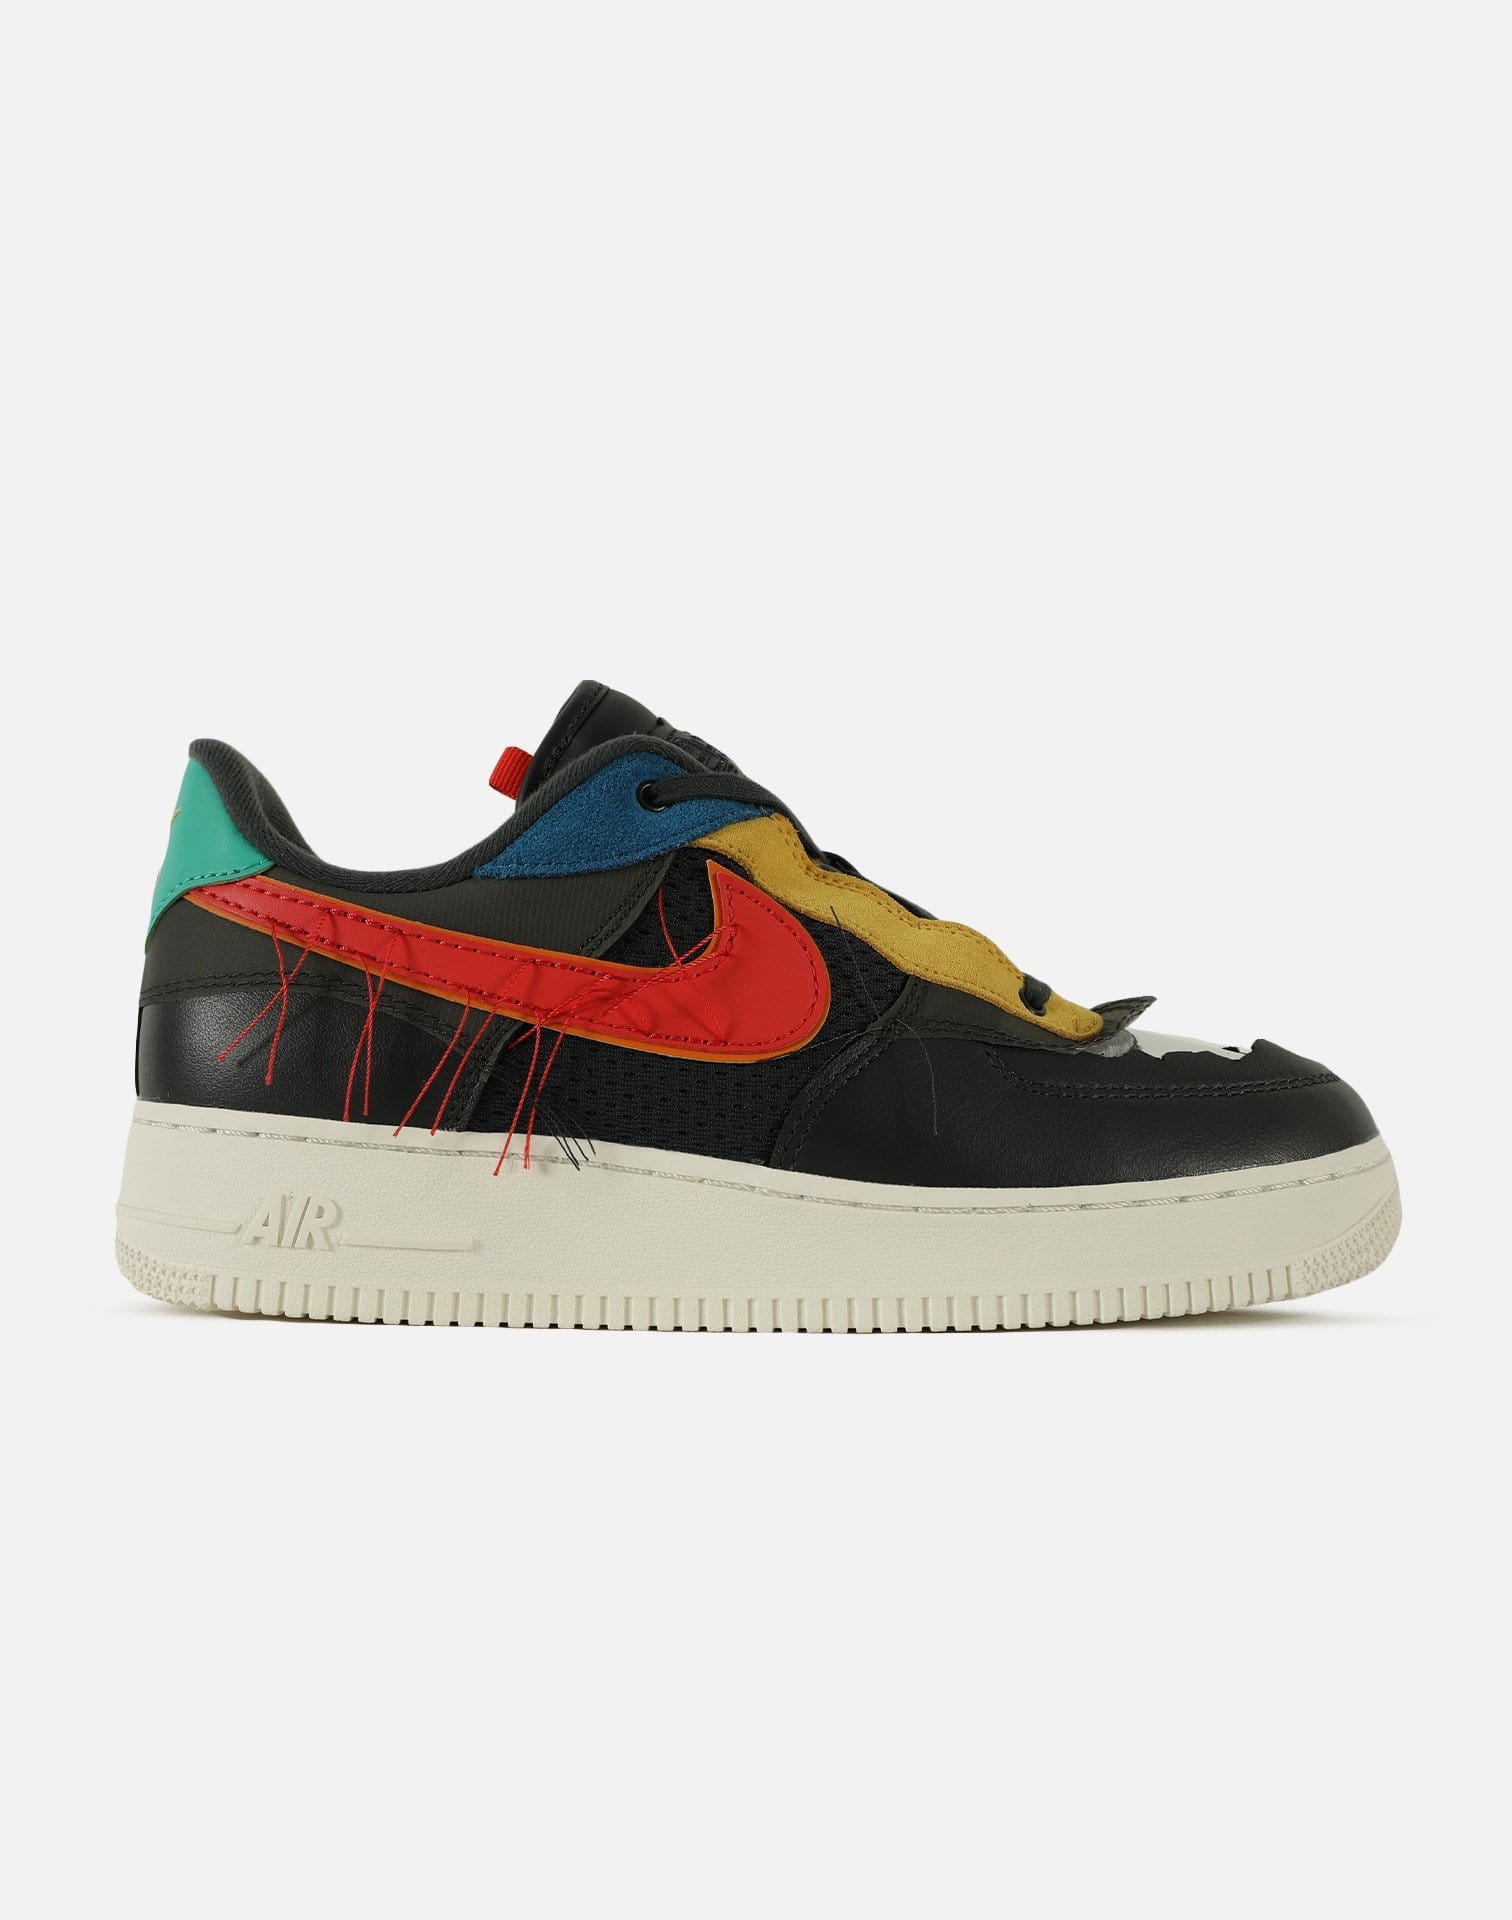 AIR FORCE 1 LOW 'BHM' – DTLR